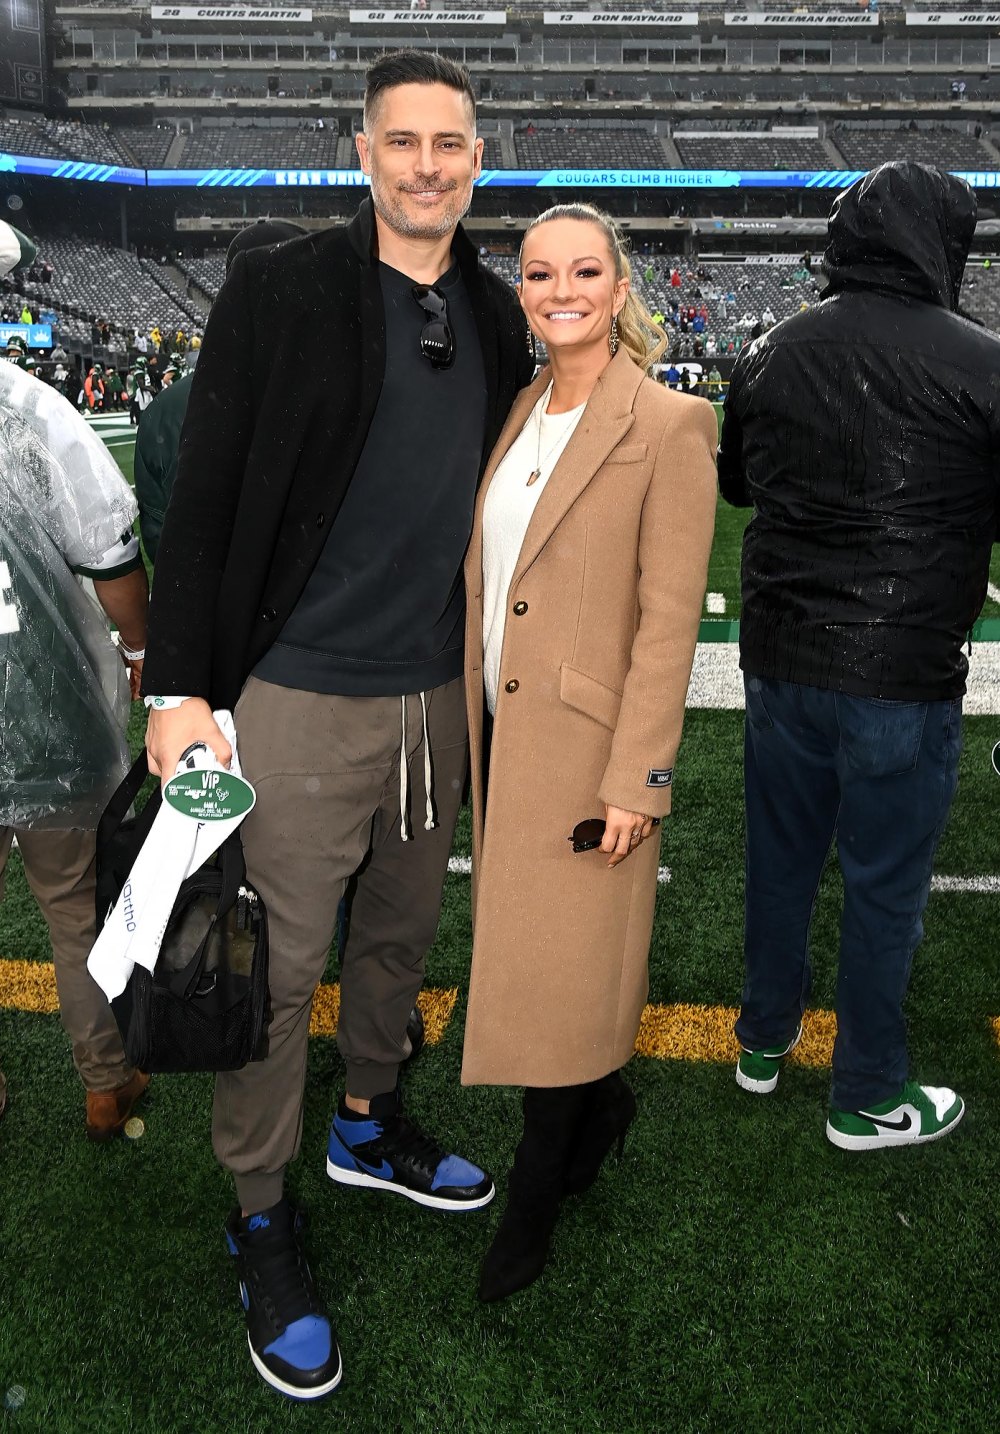 Joe Manganiello and Girlfriend Caitlin O’Connor Attend New York Jets Game Shortly After Making Debut